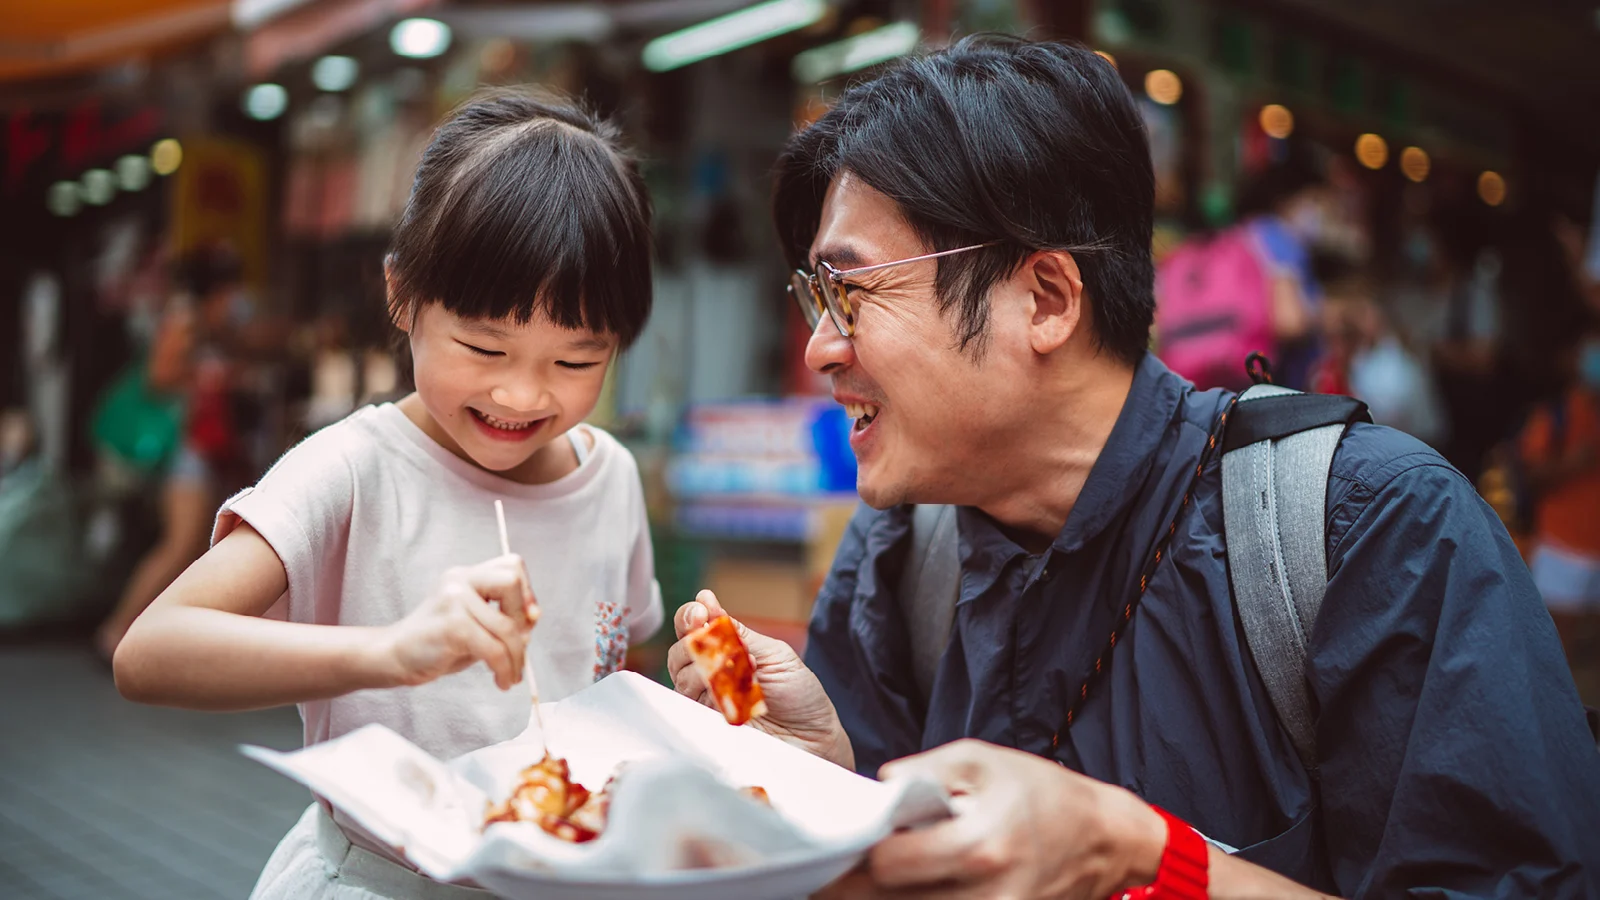 Father and daughter eating and smiling